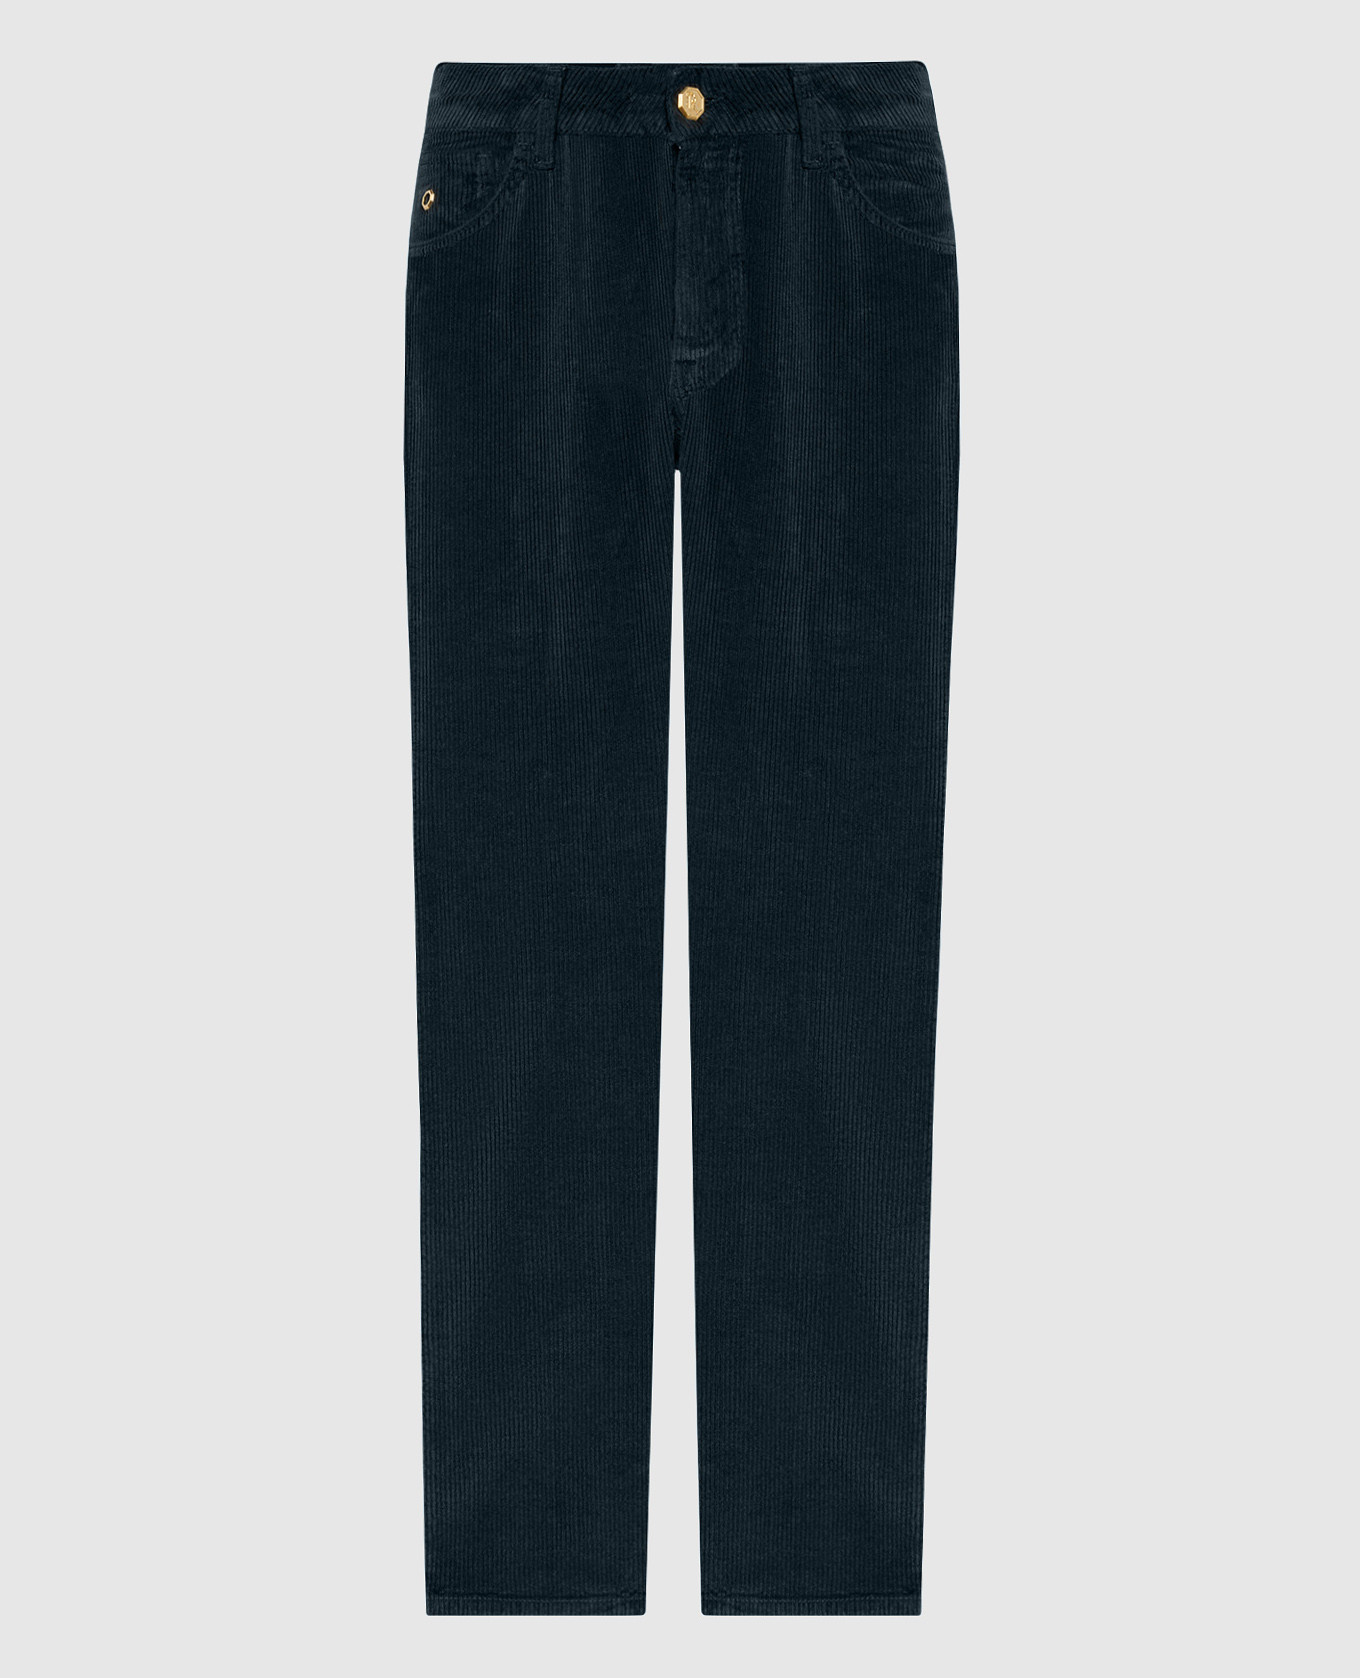 Gray corduroy trousers with logo